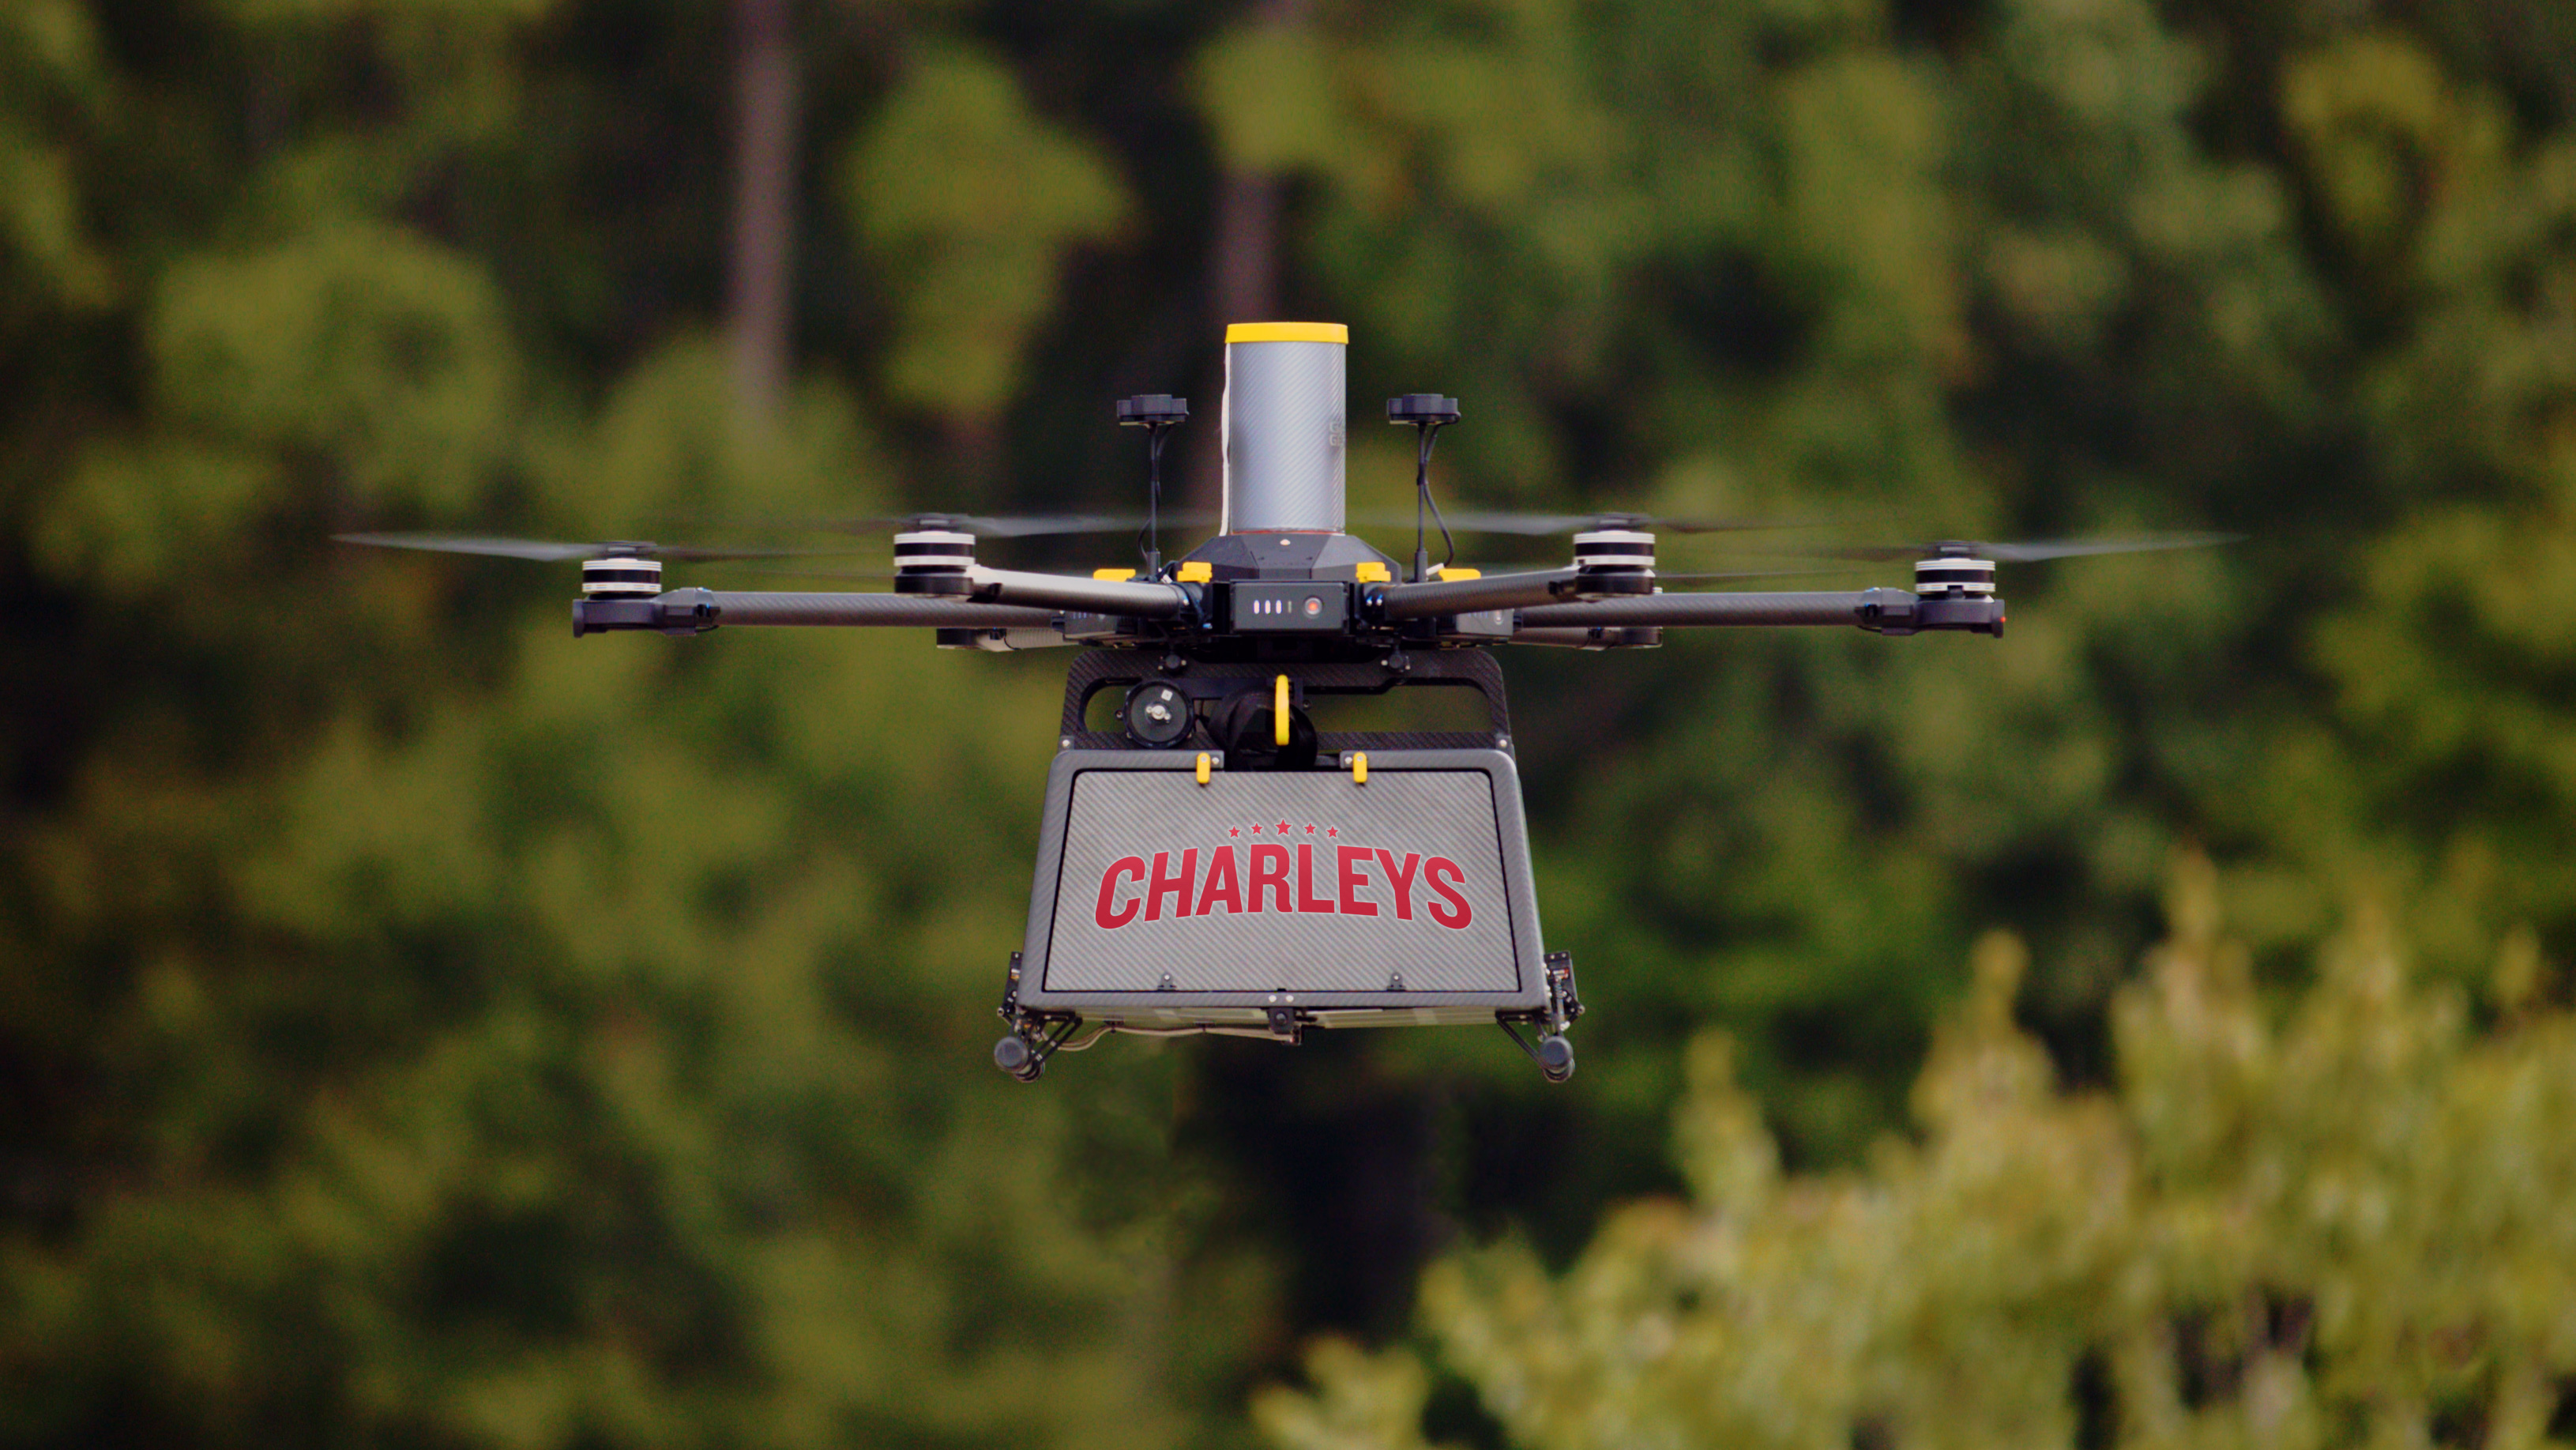 s 100 drone deliveries puts Prime Air behind Google and Walmart